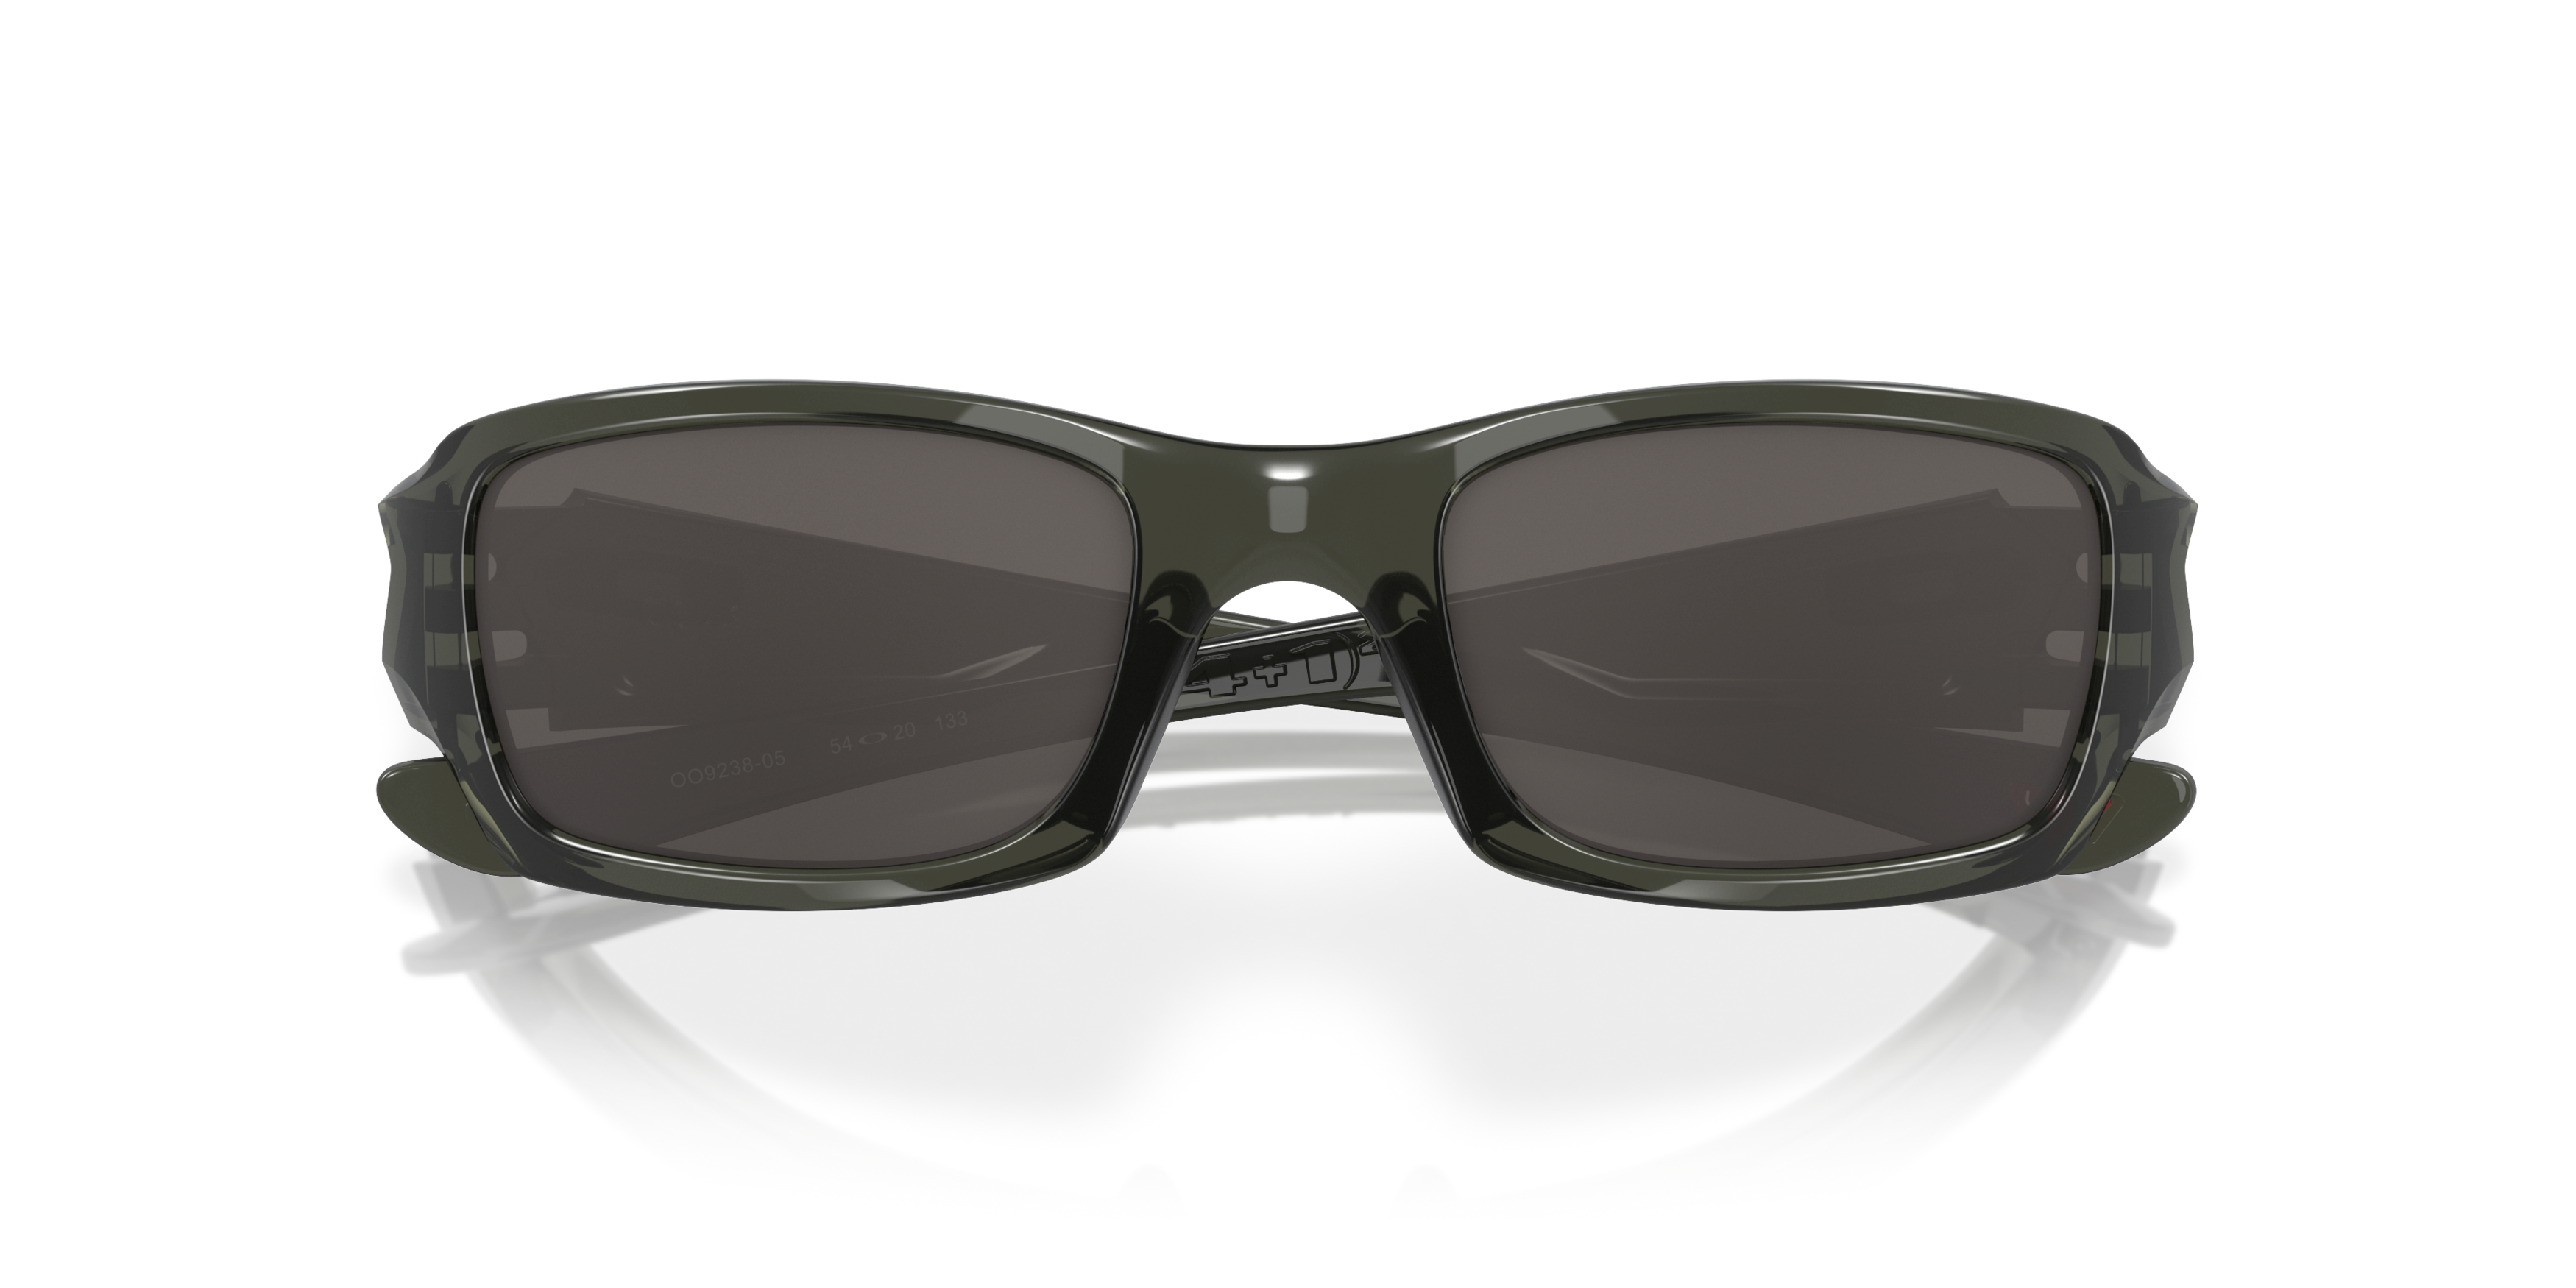 [products.image.folded] Oakley Fives OO9238 923805